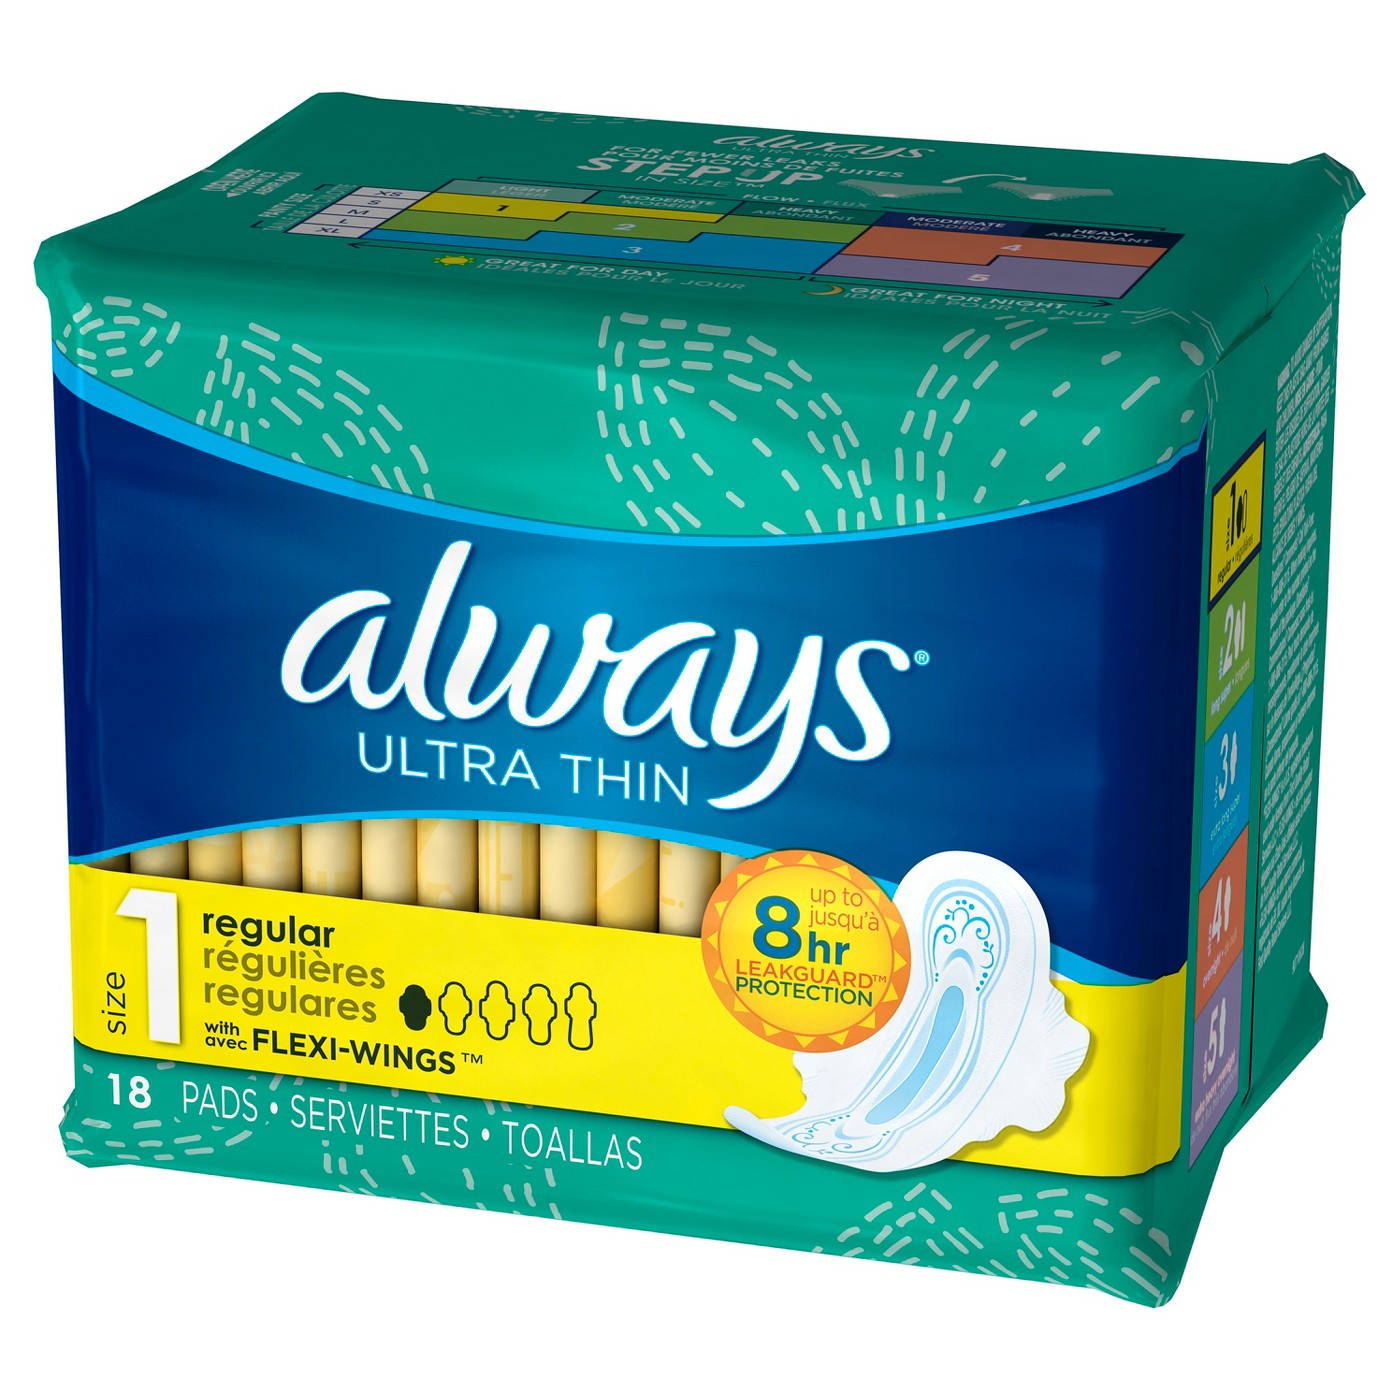 Coles Regular Pads with wings Review, Sanitary pad